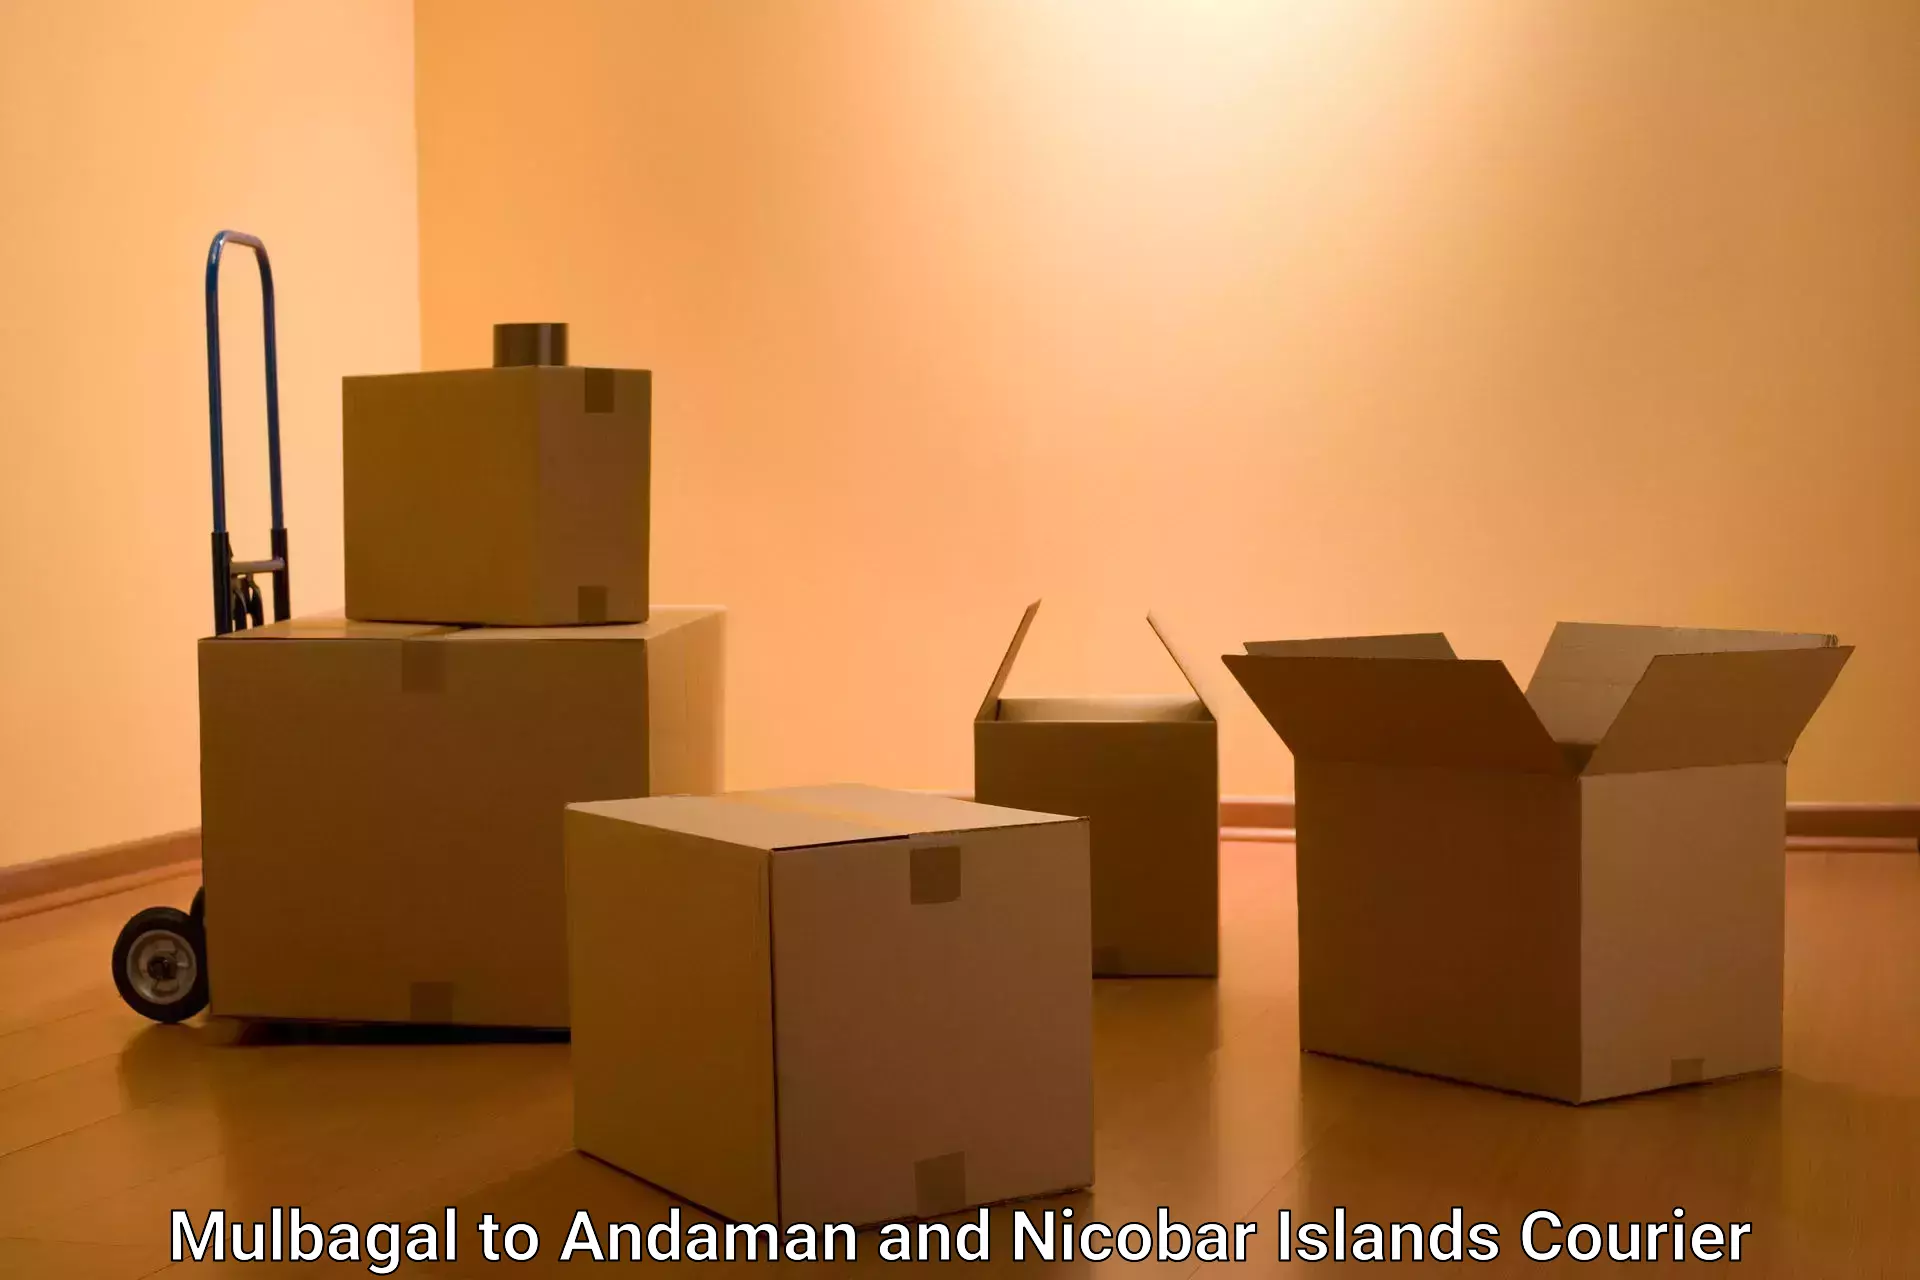 State-of-the-art courier technology Mulbagal to Andaman and Nicobar Islands